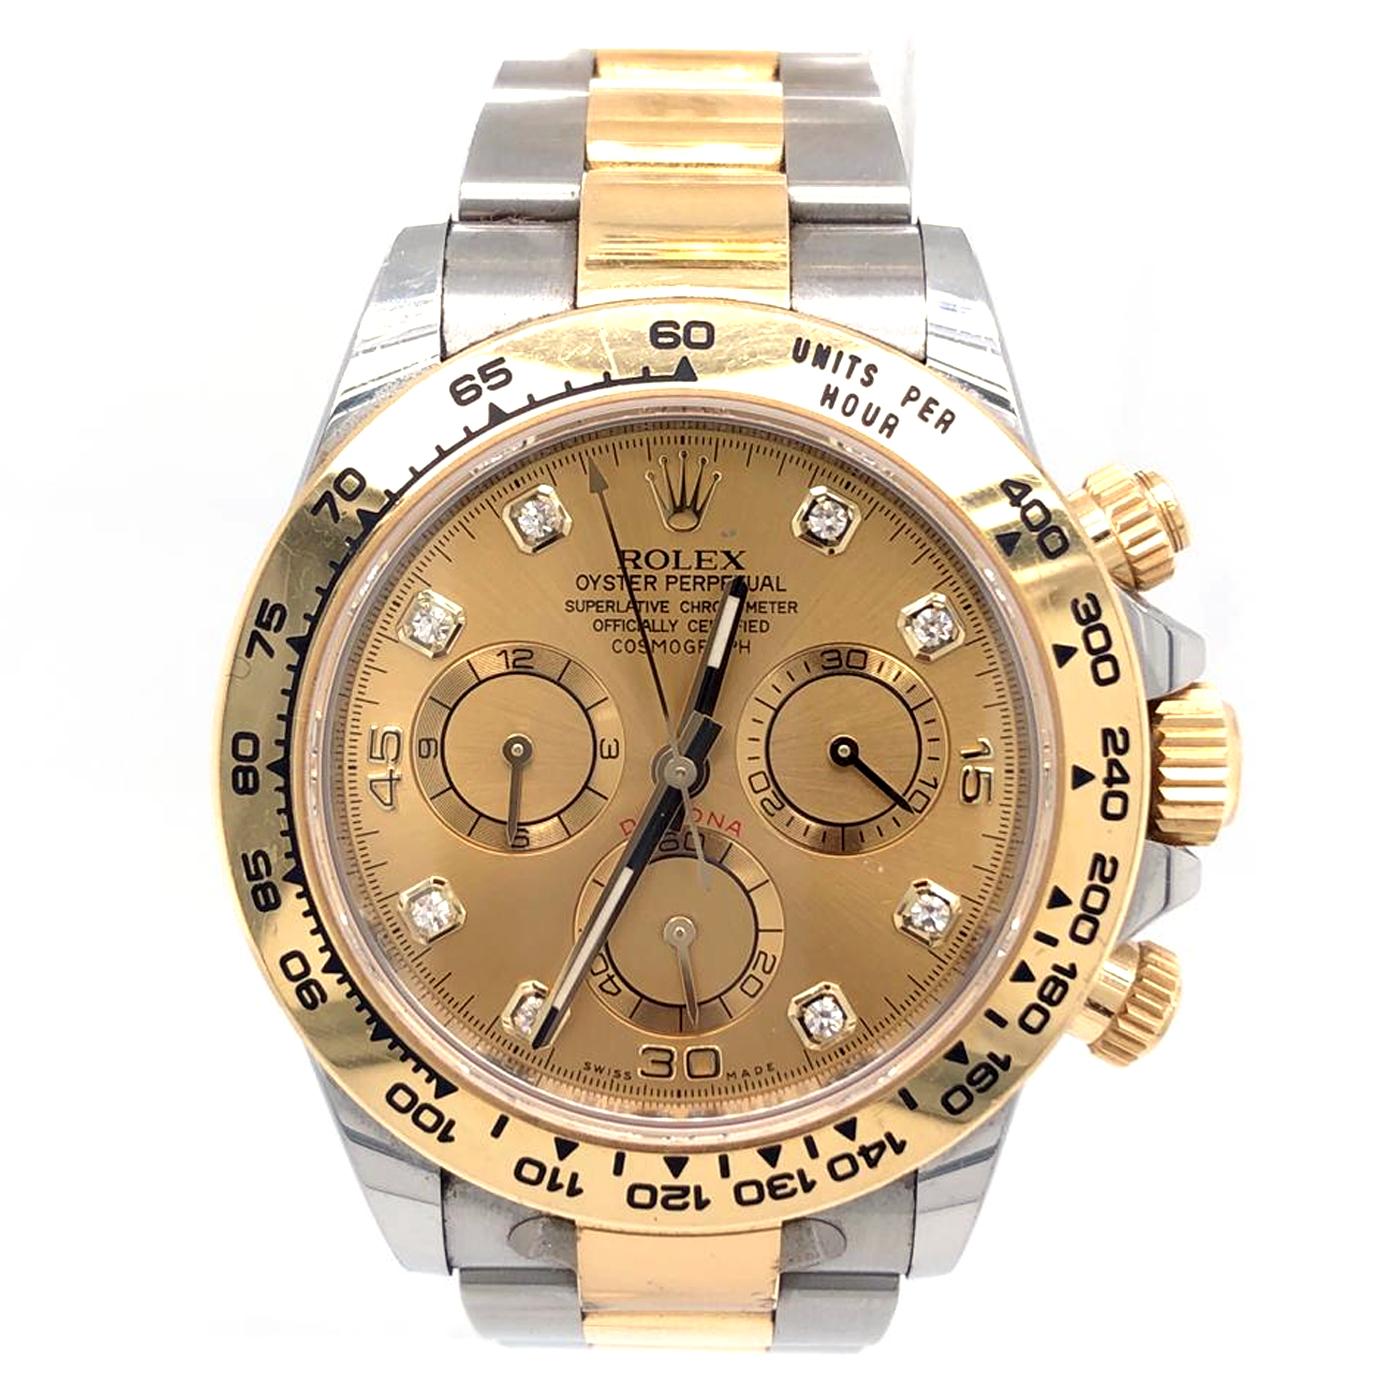 Silver-tone stainless steel case with a two-tone (silver-tone and gold-tone) stainless steel and 18kt yellow gold Rolex oyster bracelet. Fixed tachymeter scale 18kt yellow gold bezel. Champagne dial with gold-tone hands and diamond hour markers.